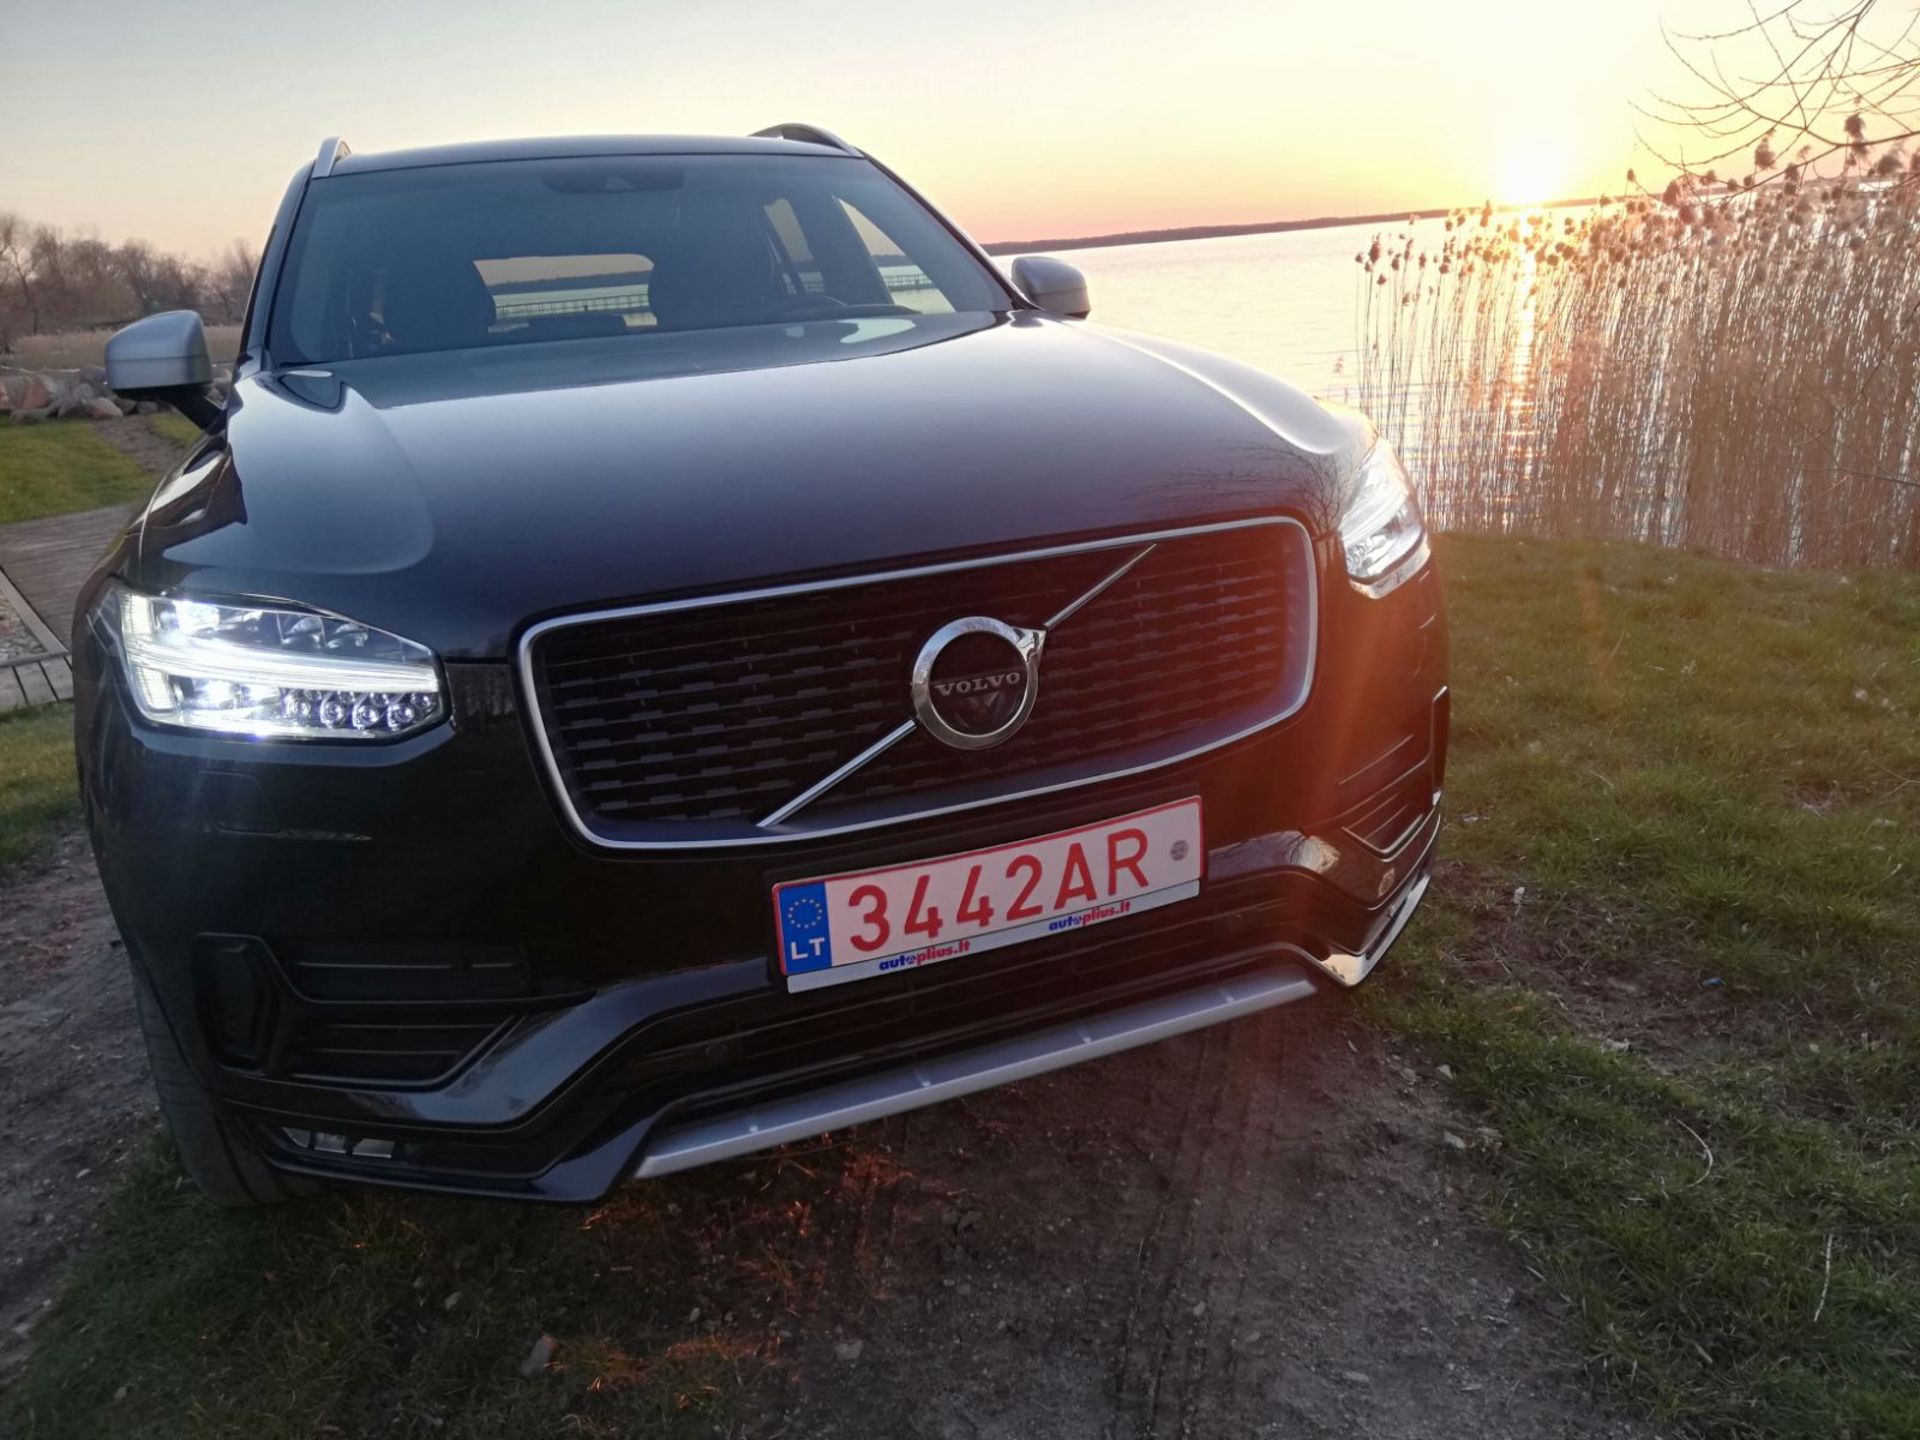 2017 VOLVO XC90 T6 AWD LEFT HAND DRIVE R-DESIGN 2.0L PETROL AUTOMATIC, 45,000 KM, DRIVES LIKE NEW - Image 6 of 43